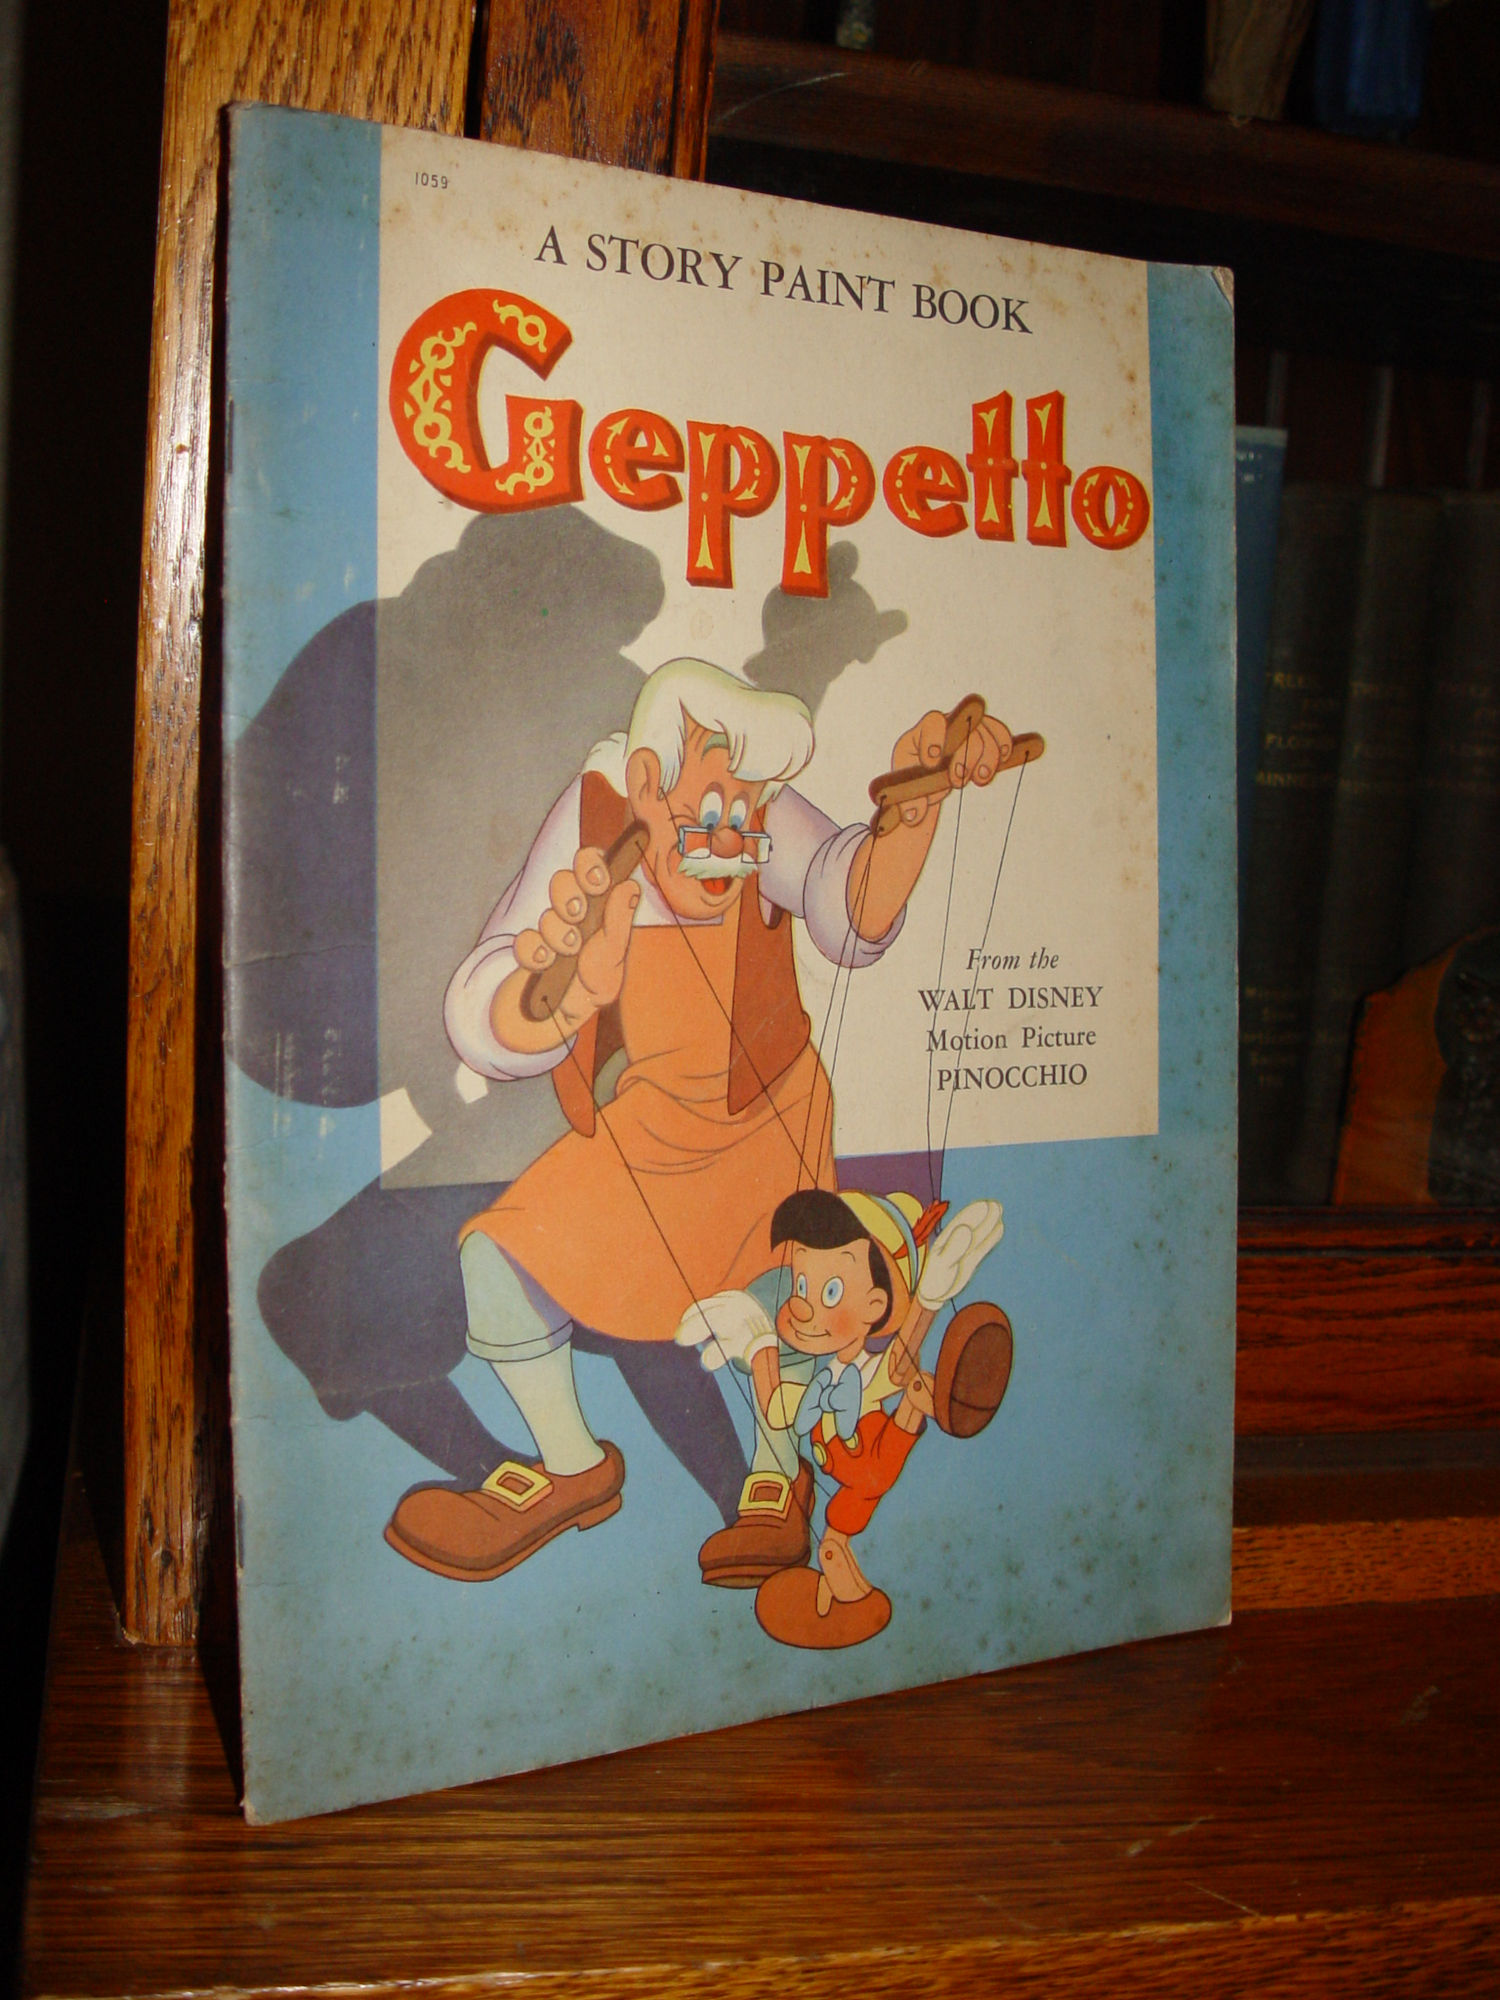 Pinocchio Geppetto Story Paint Book #1059 (Whitman,
                1940)